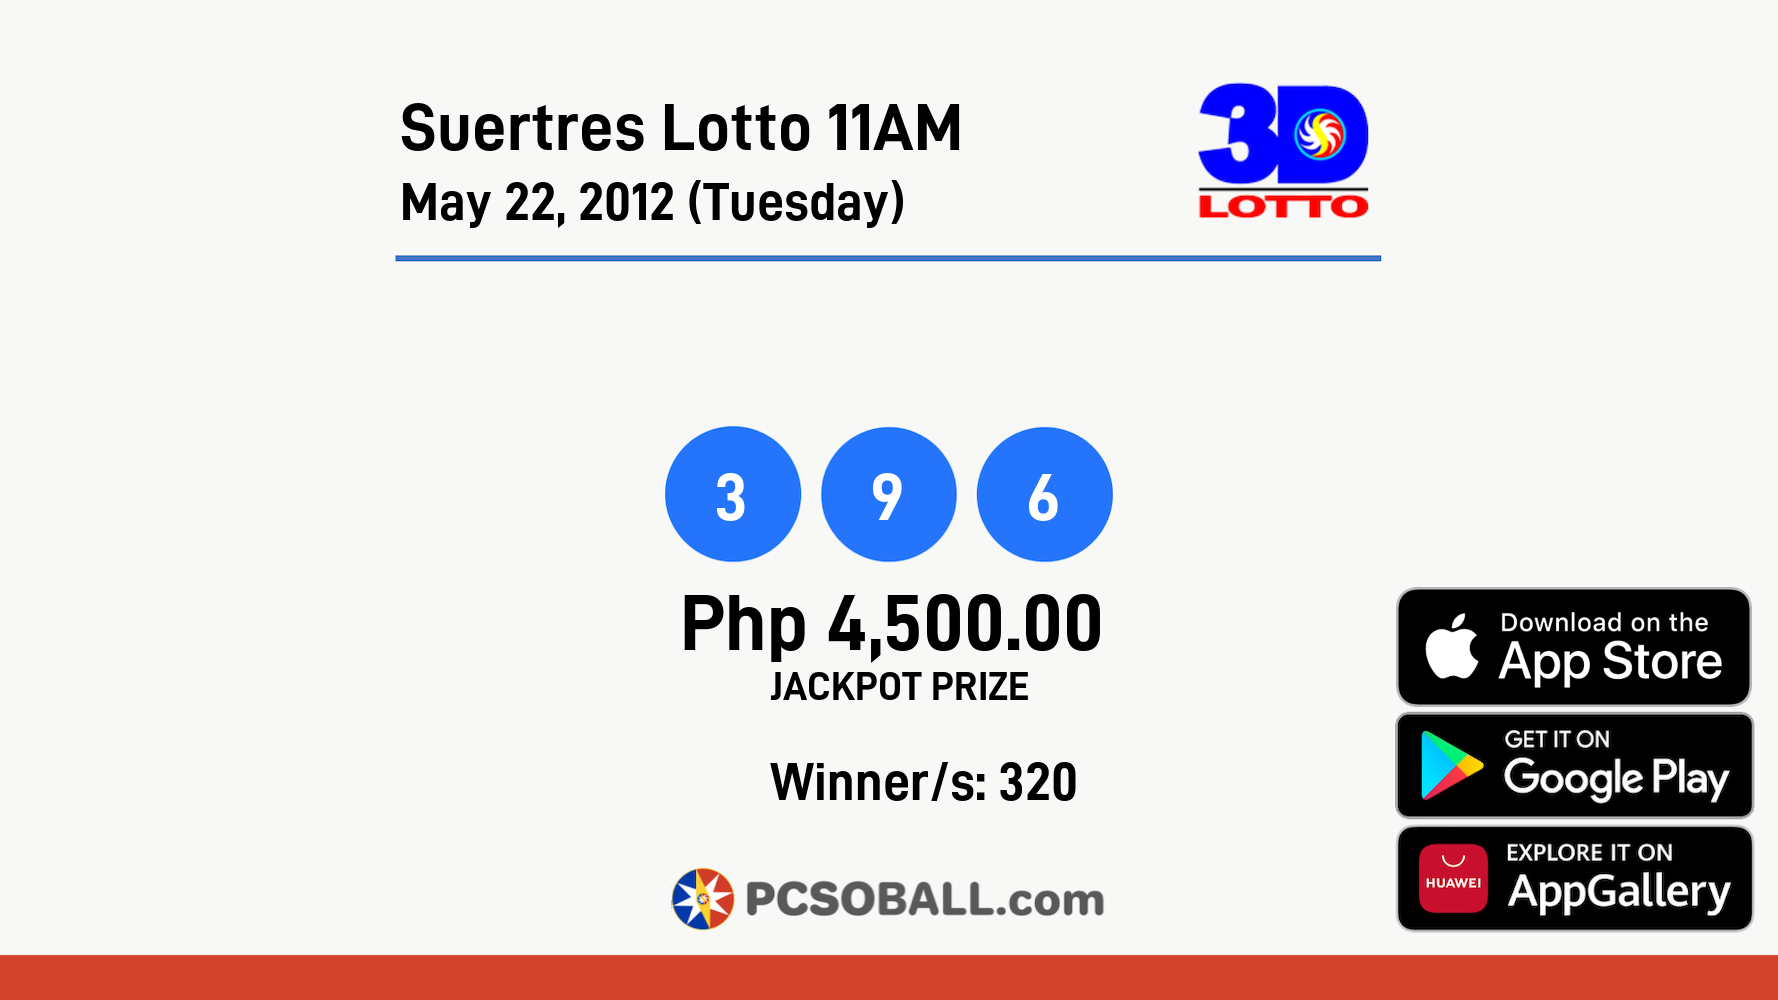 Suertres Lotto 11AM May 22, 2012 (Tuesday) Result